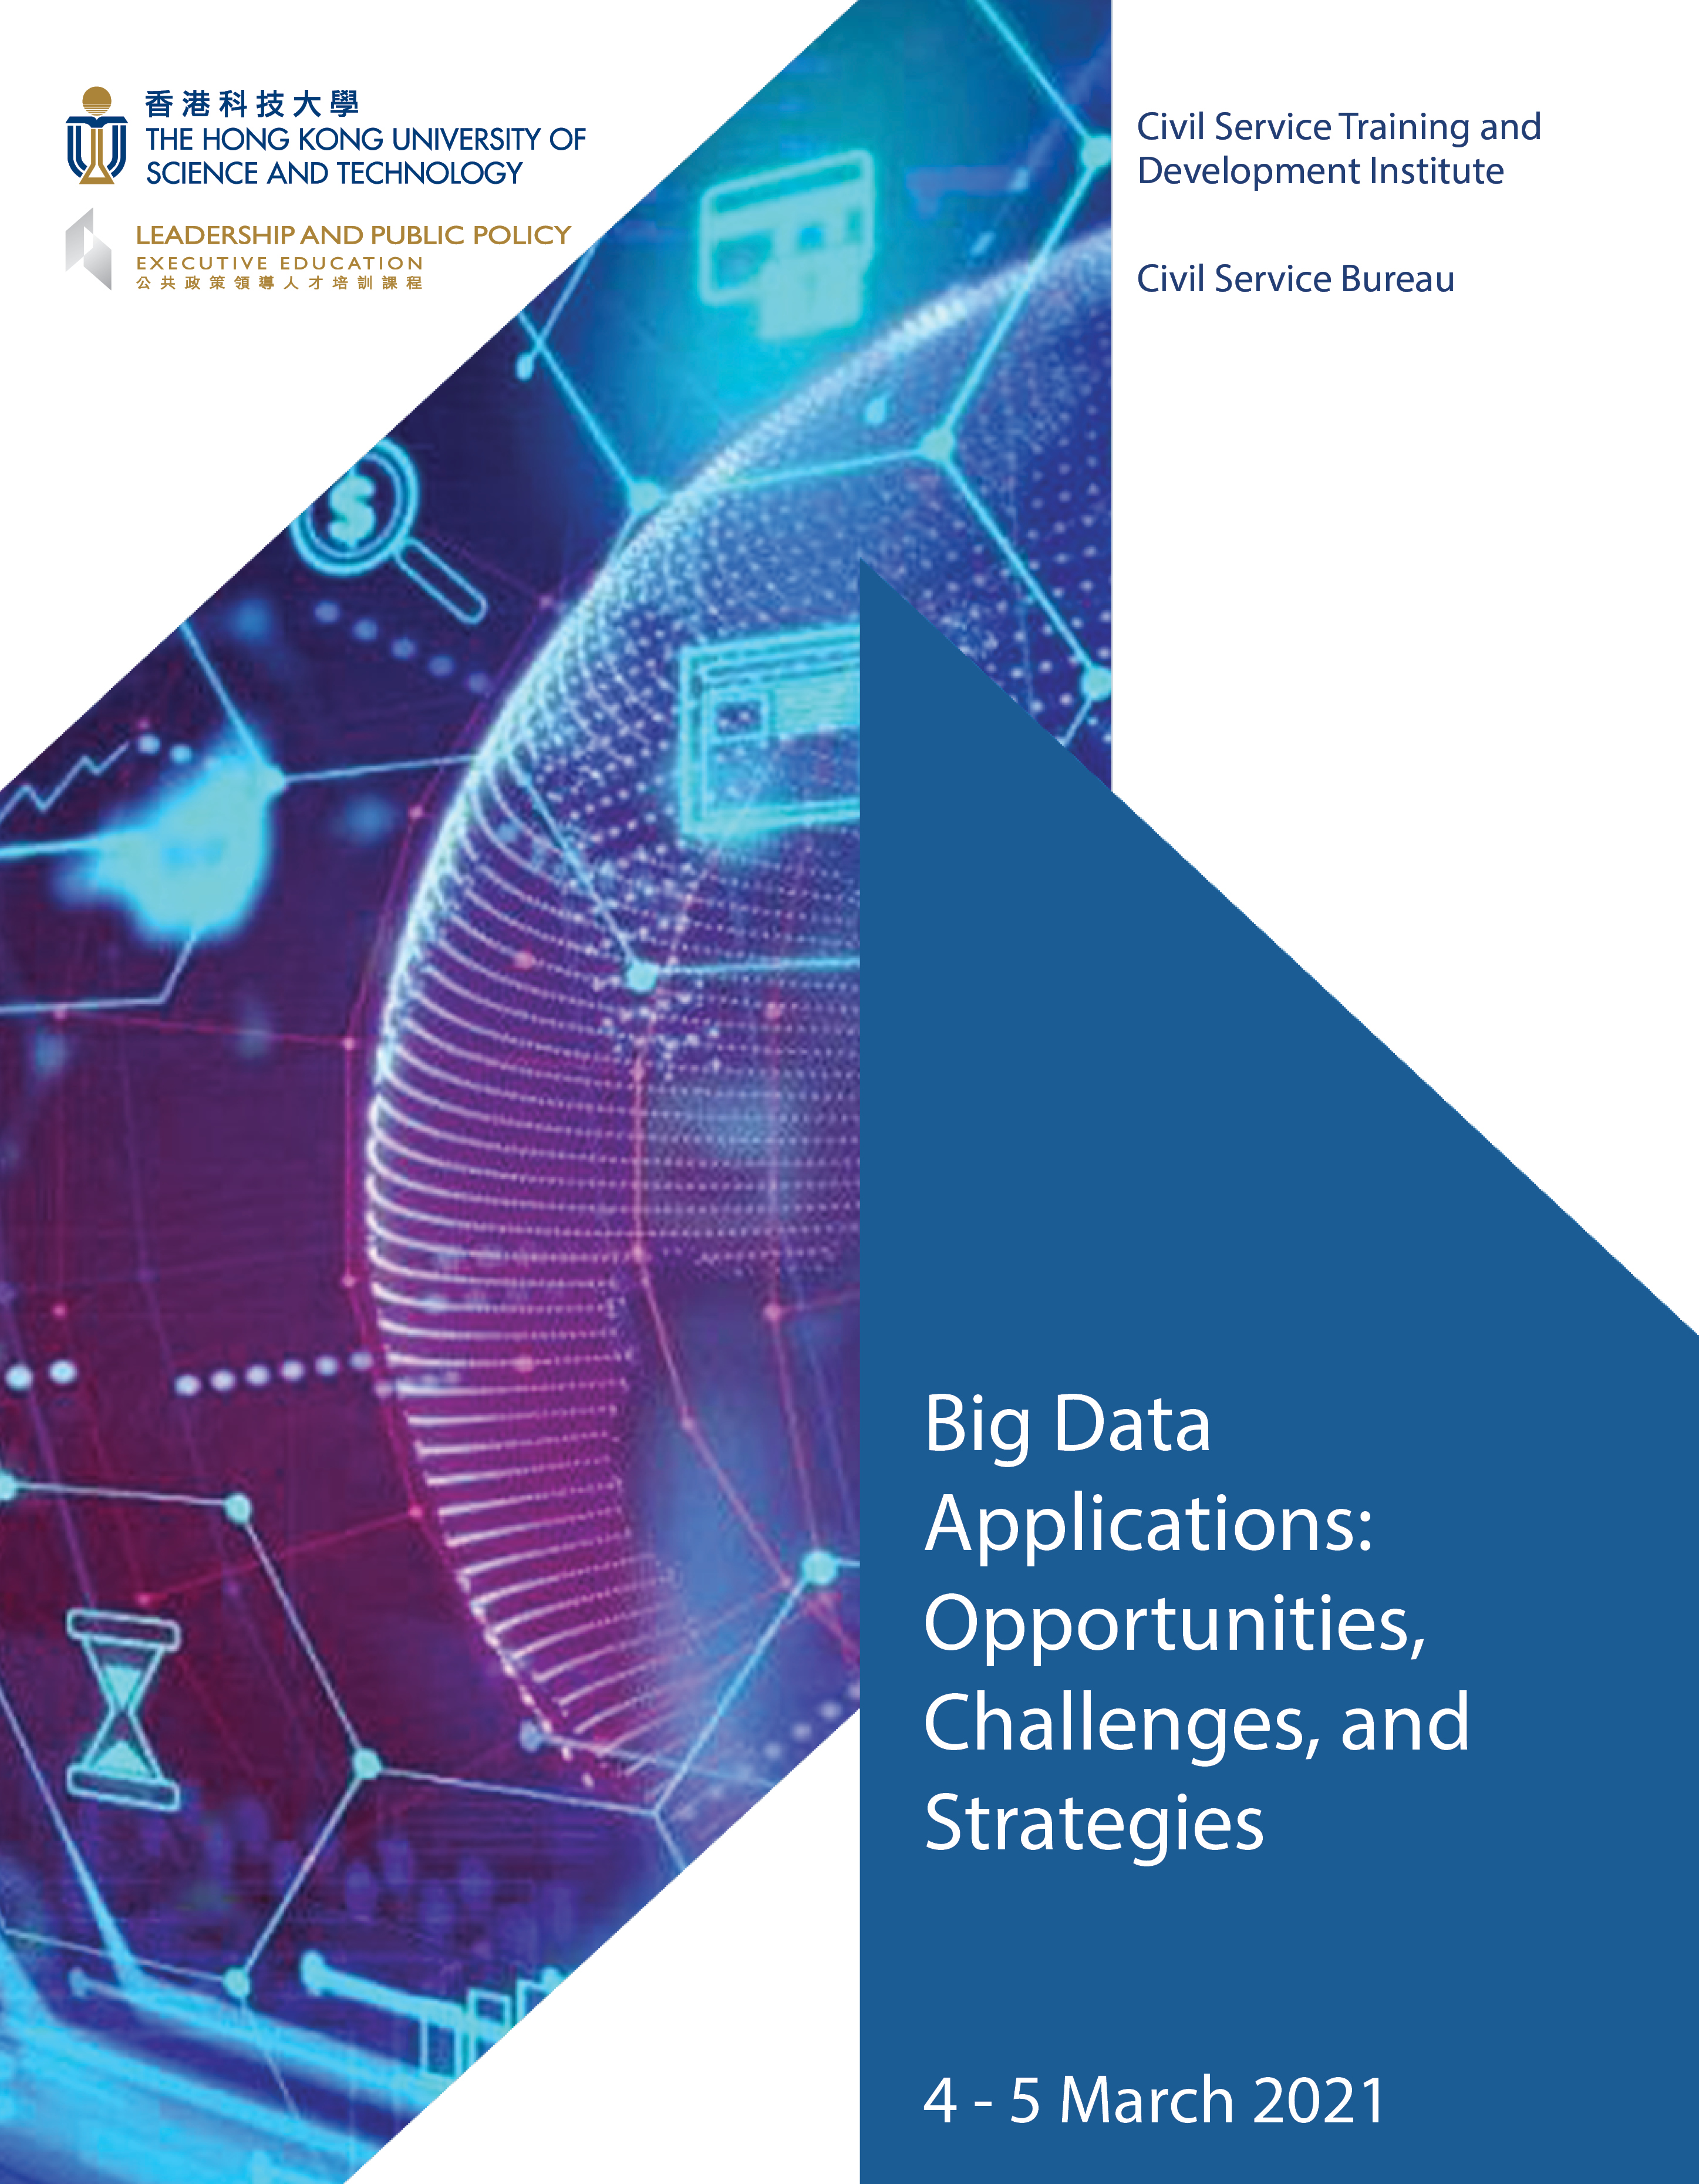 Big Data Applications: Opportunities, Challenges, and Strategies (4-5 March 2021)